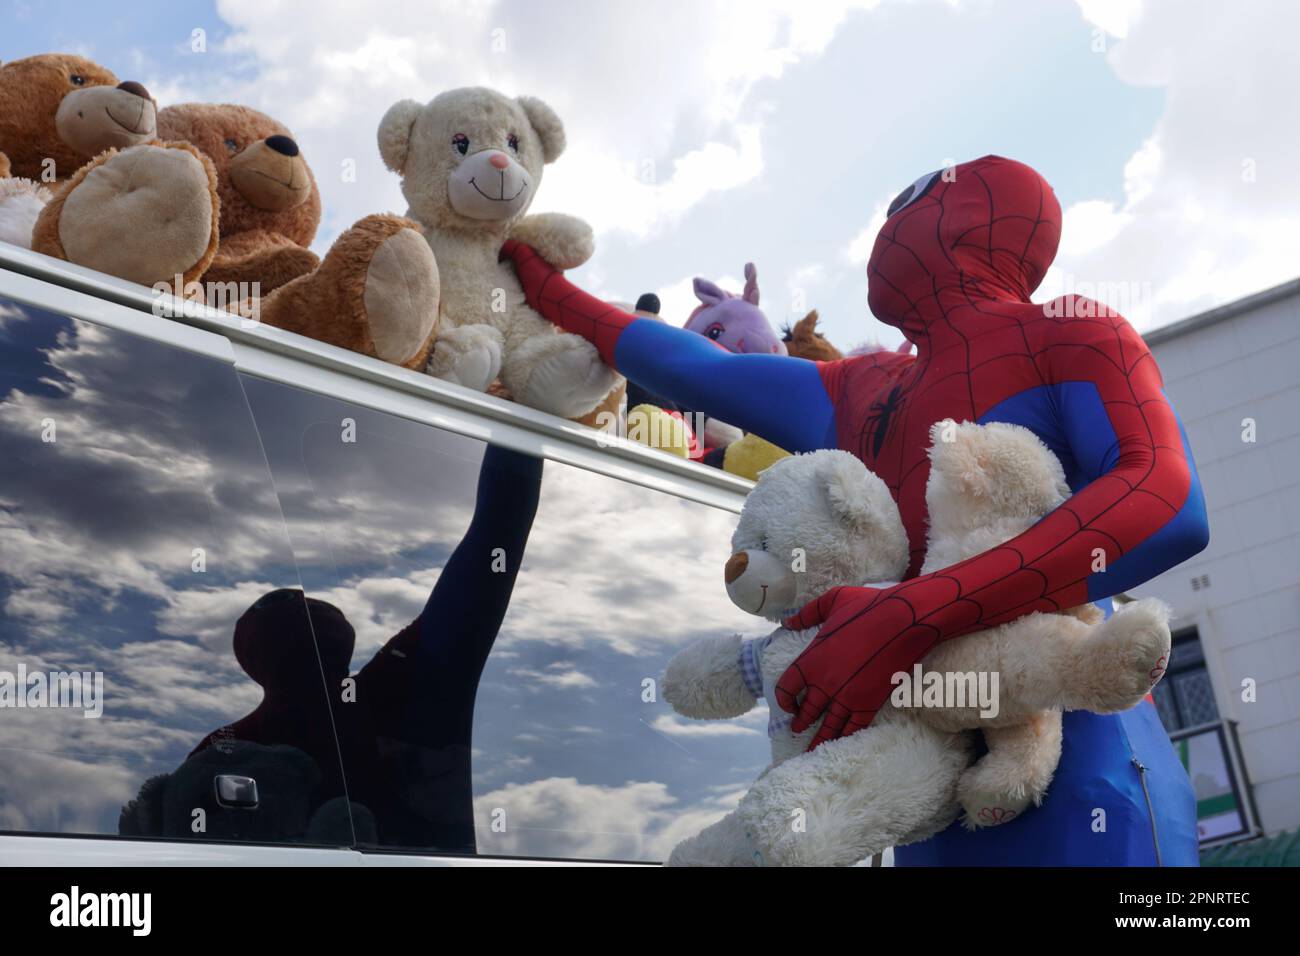 Farai Mabiza wears a Spiderman costume to attract customers to toy merchandise displayed on his car in Harare, Zimbabwe. Mabiza says his business has not been lucrative during the coronavirus pandemic since toys are a luxury for some. (Gamuchirai Masiyiwa/Global Press Journal) Stock Photo